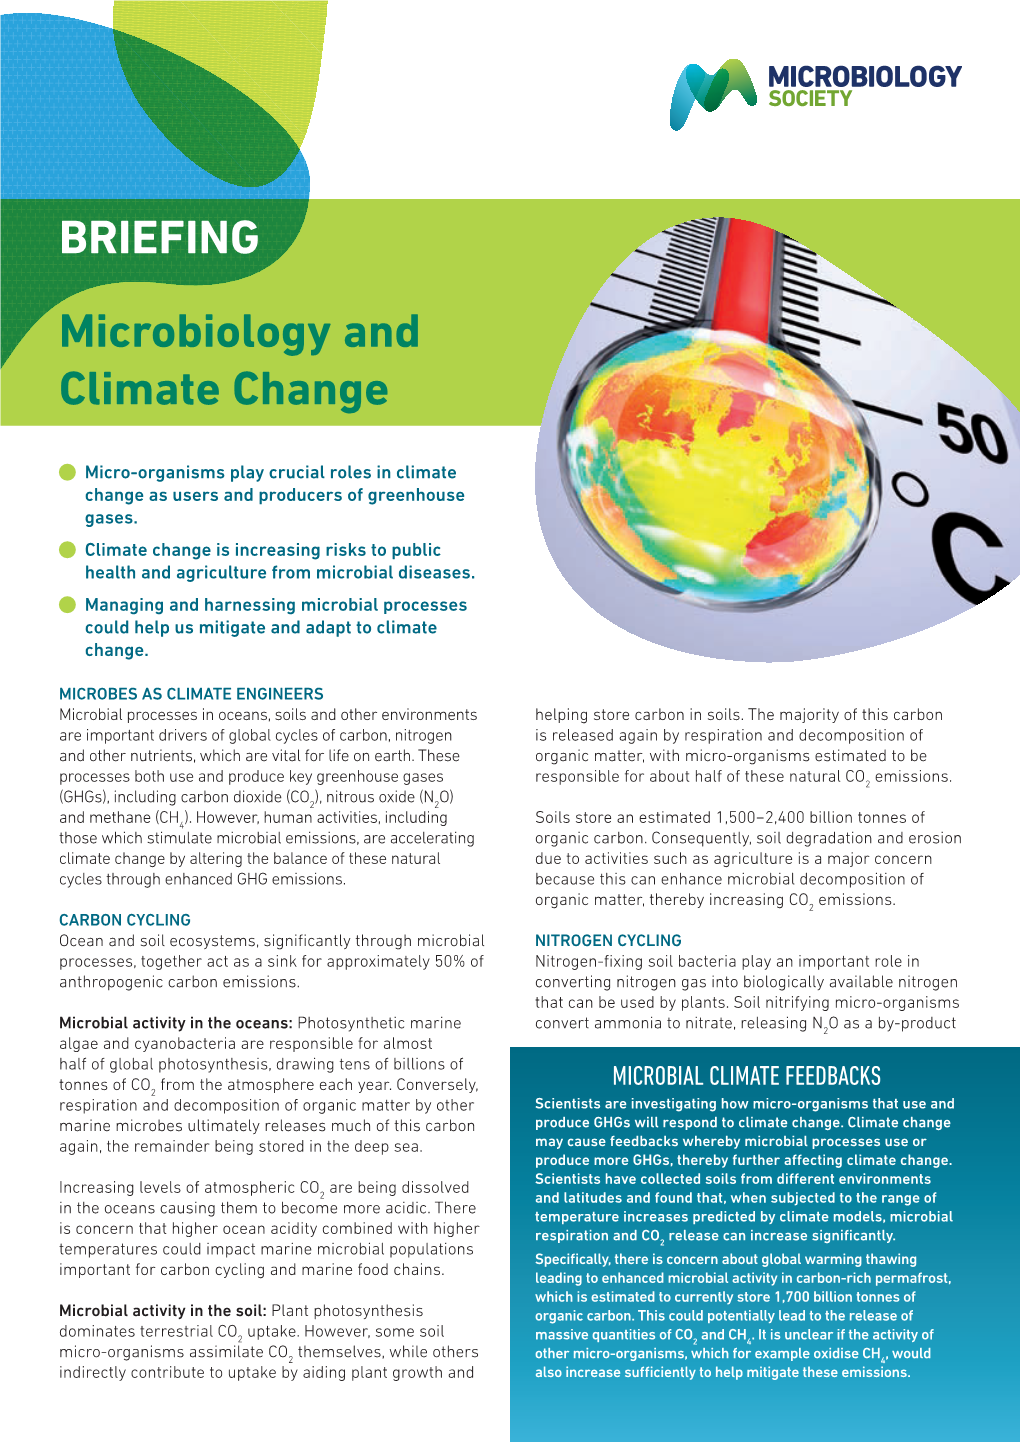 Microbiology and Climate Change BRIEFING